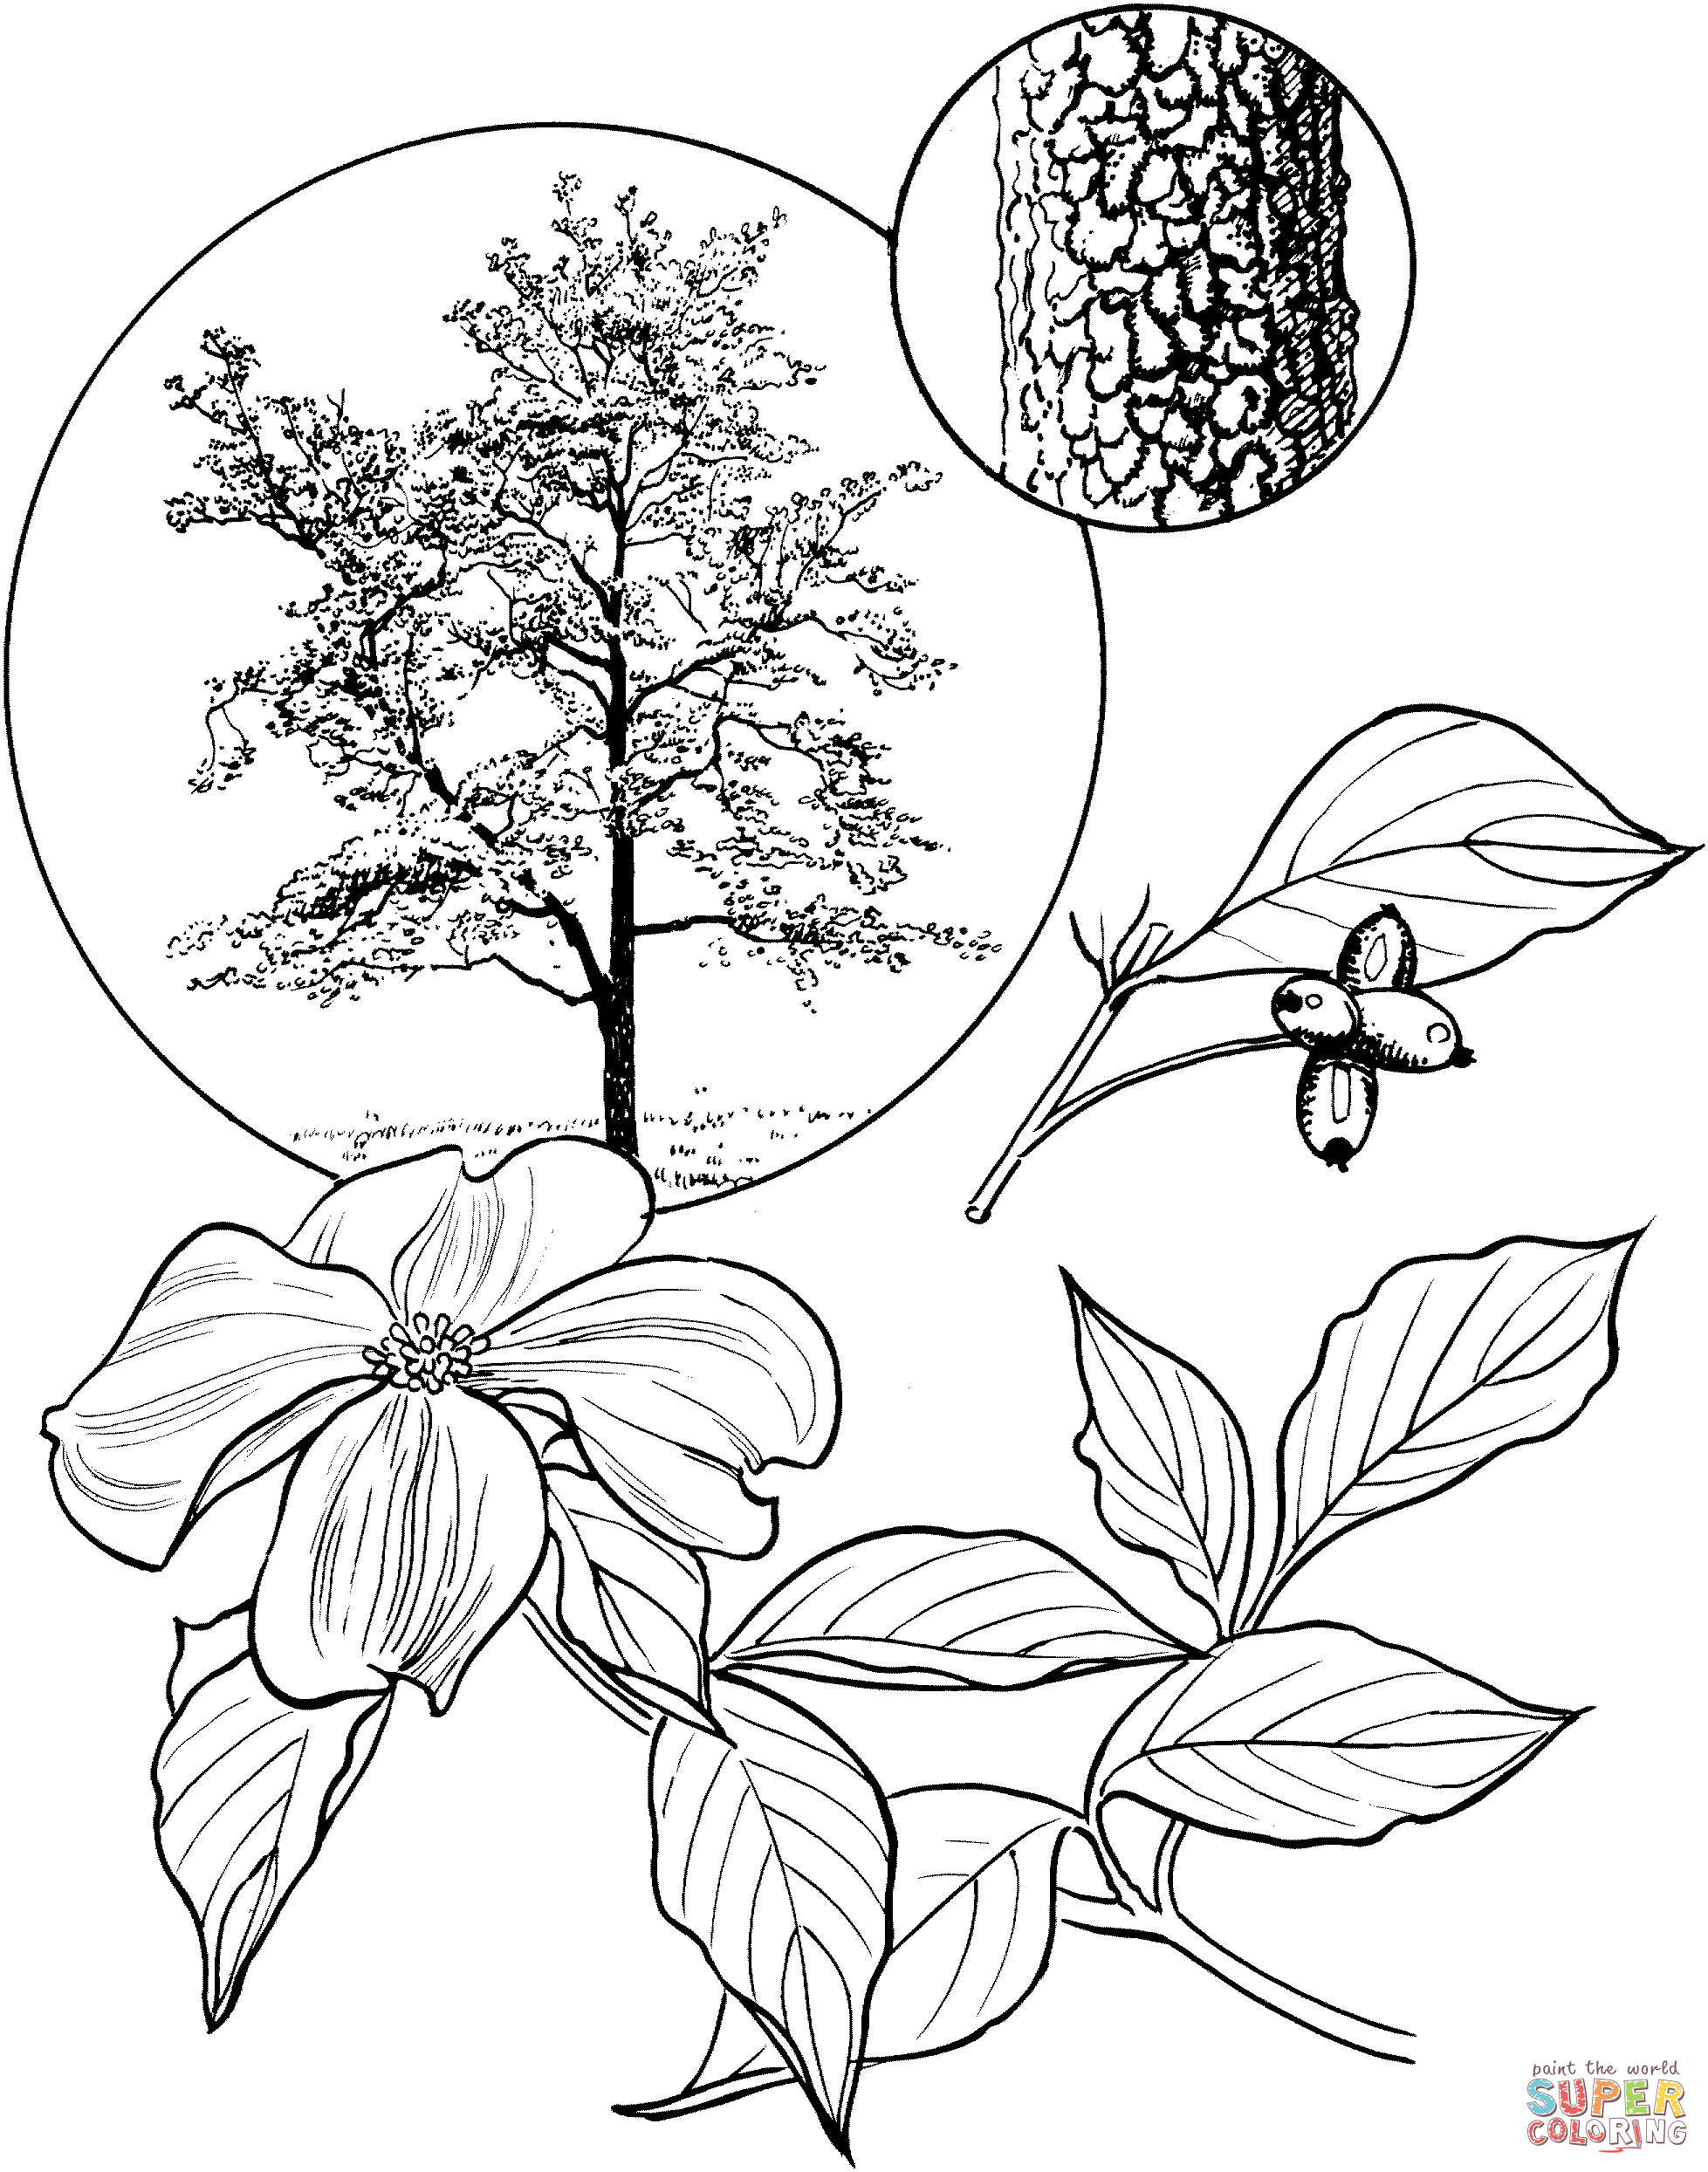 Dogwood coloring #14, Download drawings